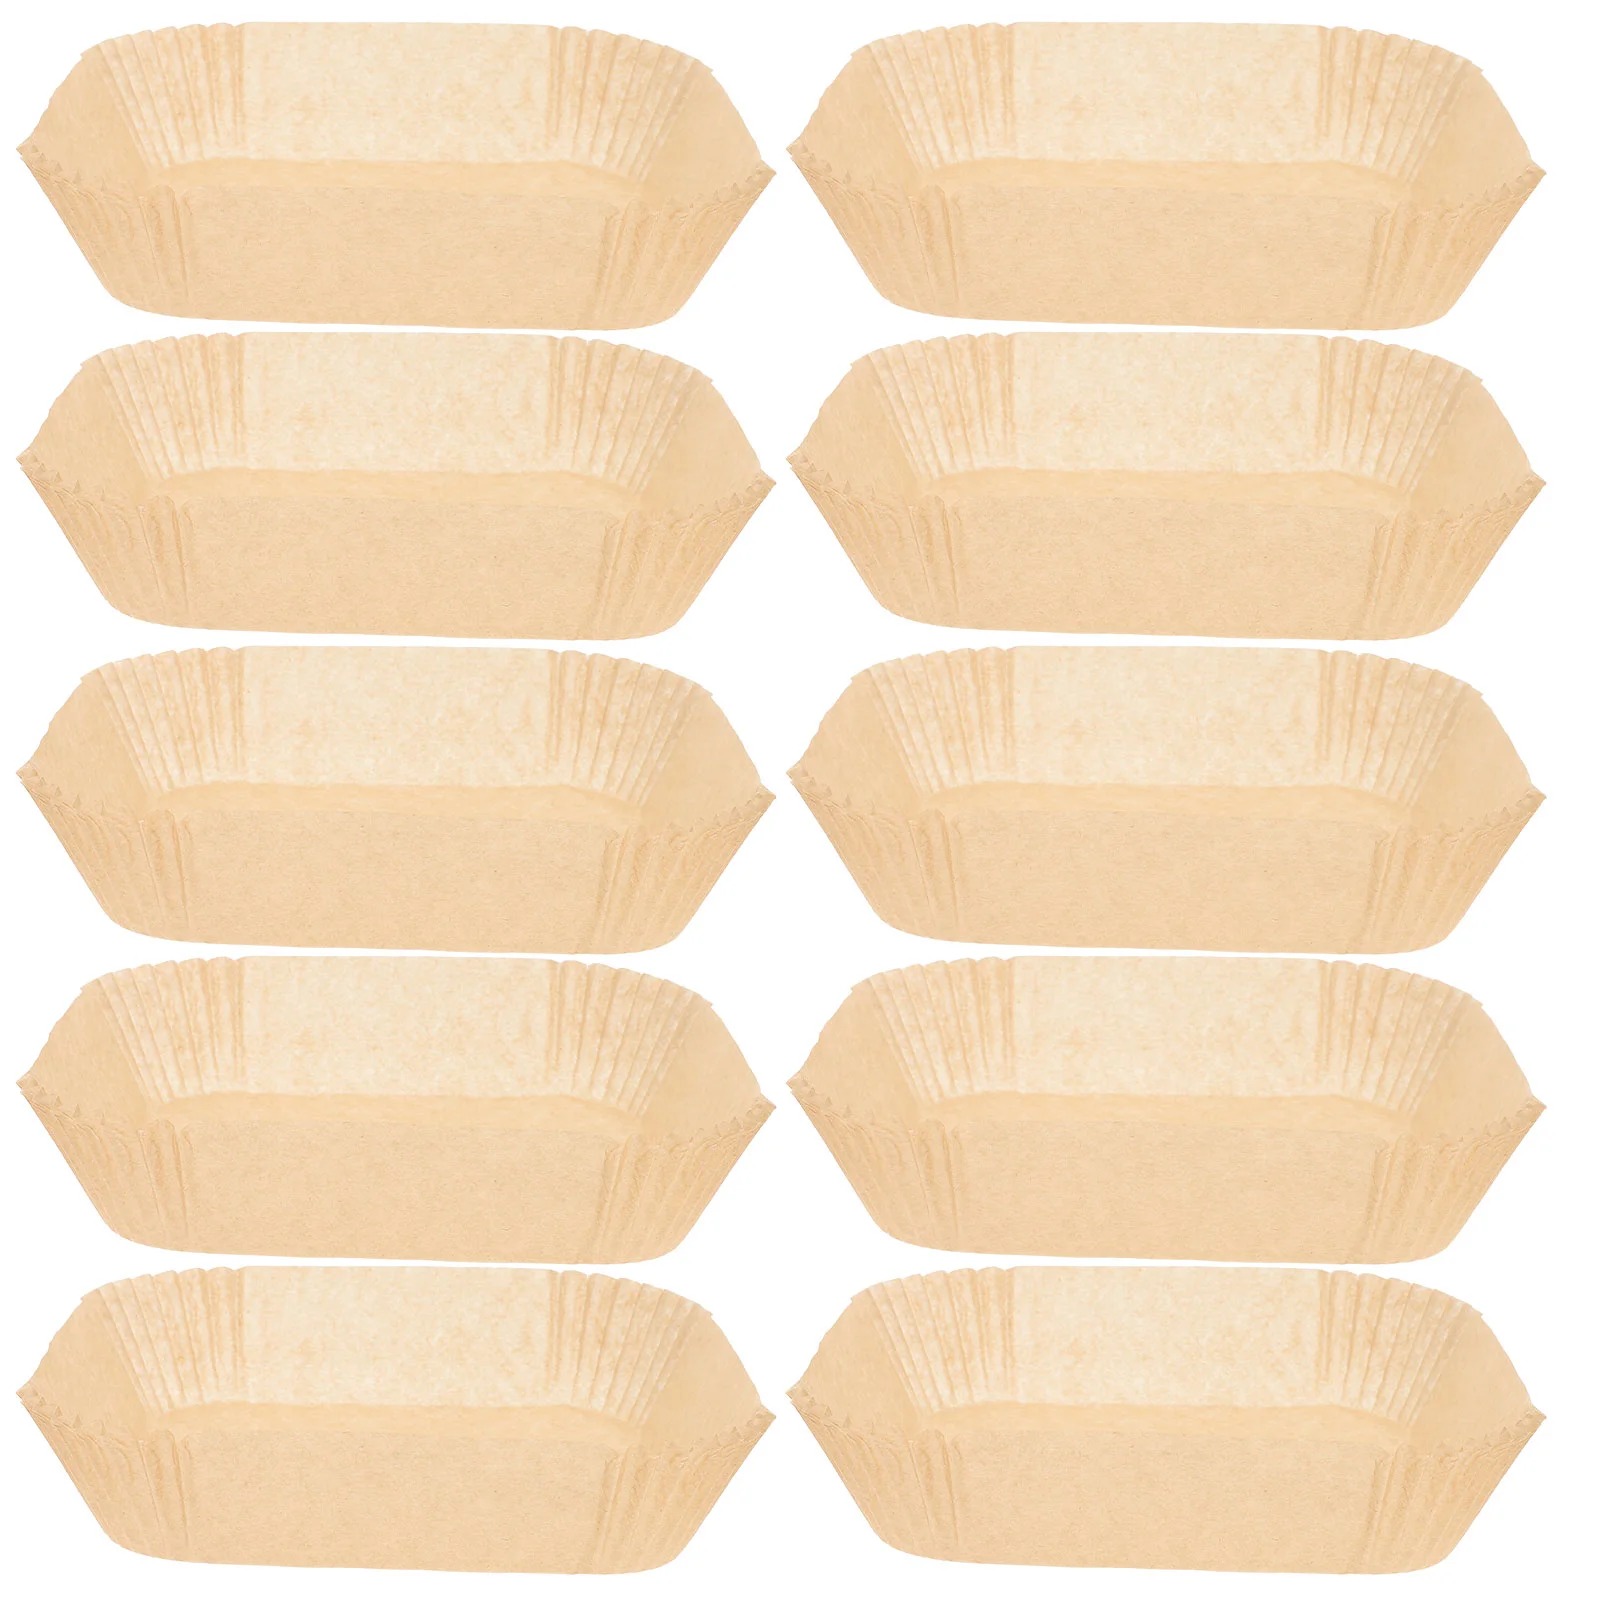 

100 Pcs Air Fryer Paper Disposable Baking Pan Barbecue Tools Supplies Tray Virgin Wood Pulp Pans Heat-resistant Liner